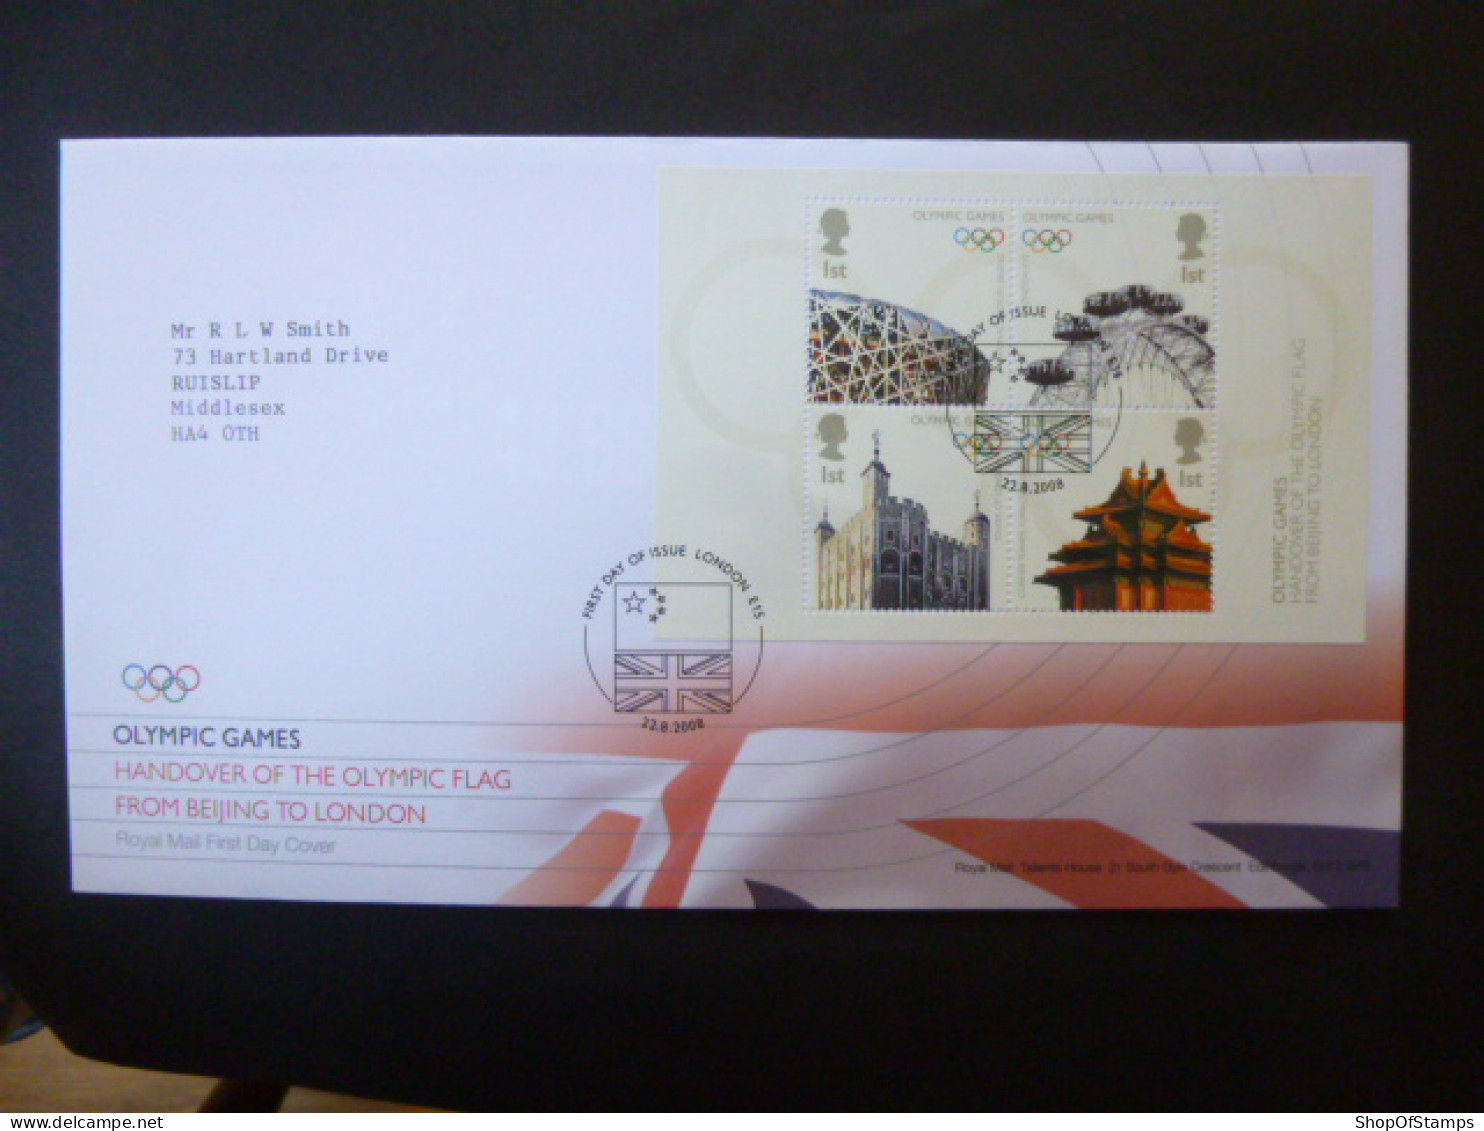 GREAT BRITAIN SG 2861MS HANDOVER OF OLYMPIC FLAG LANDMARKS OF LONDON & BEIJING FDC LONDON - Unclassified